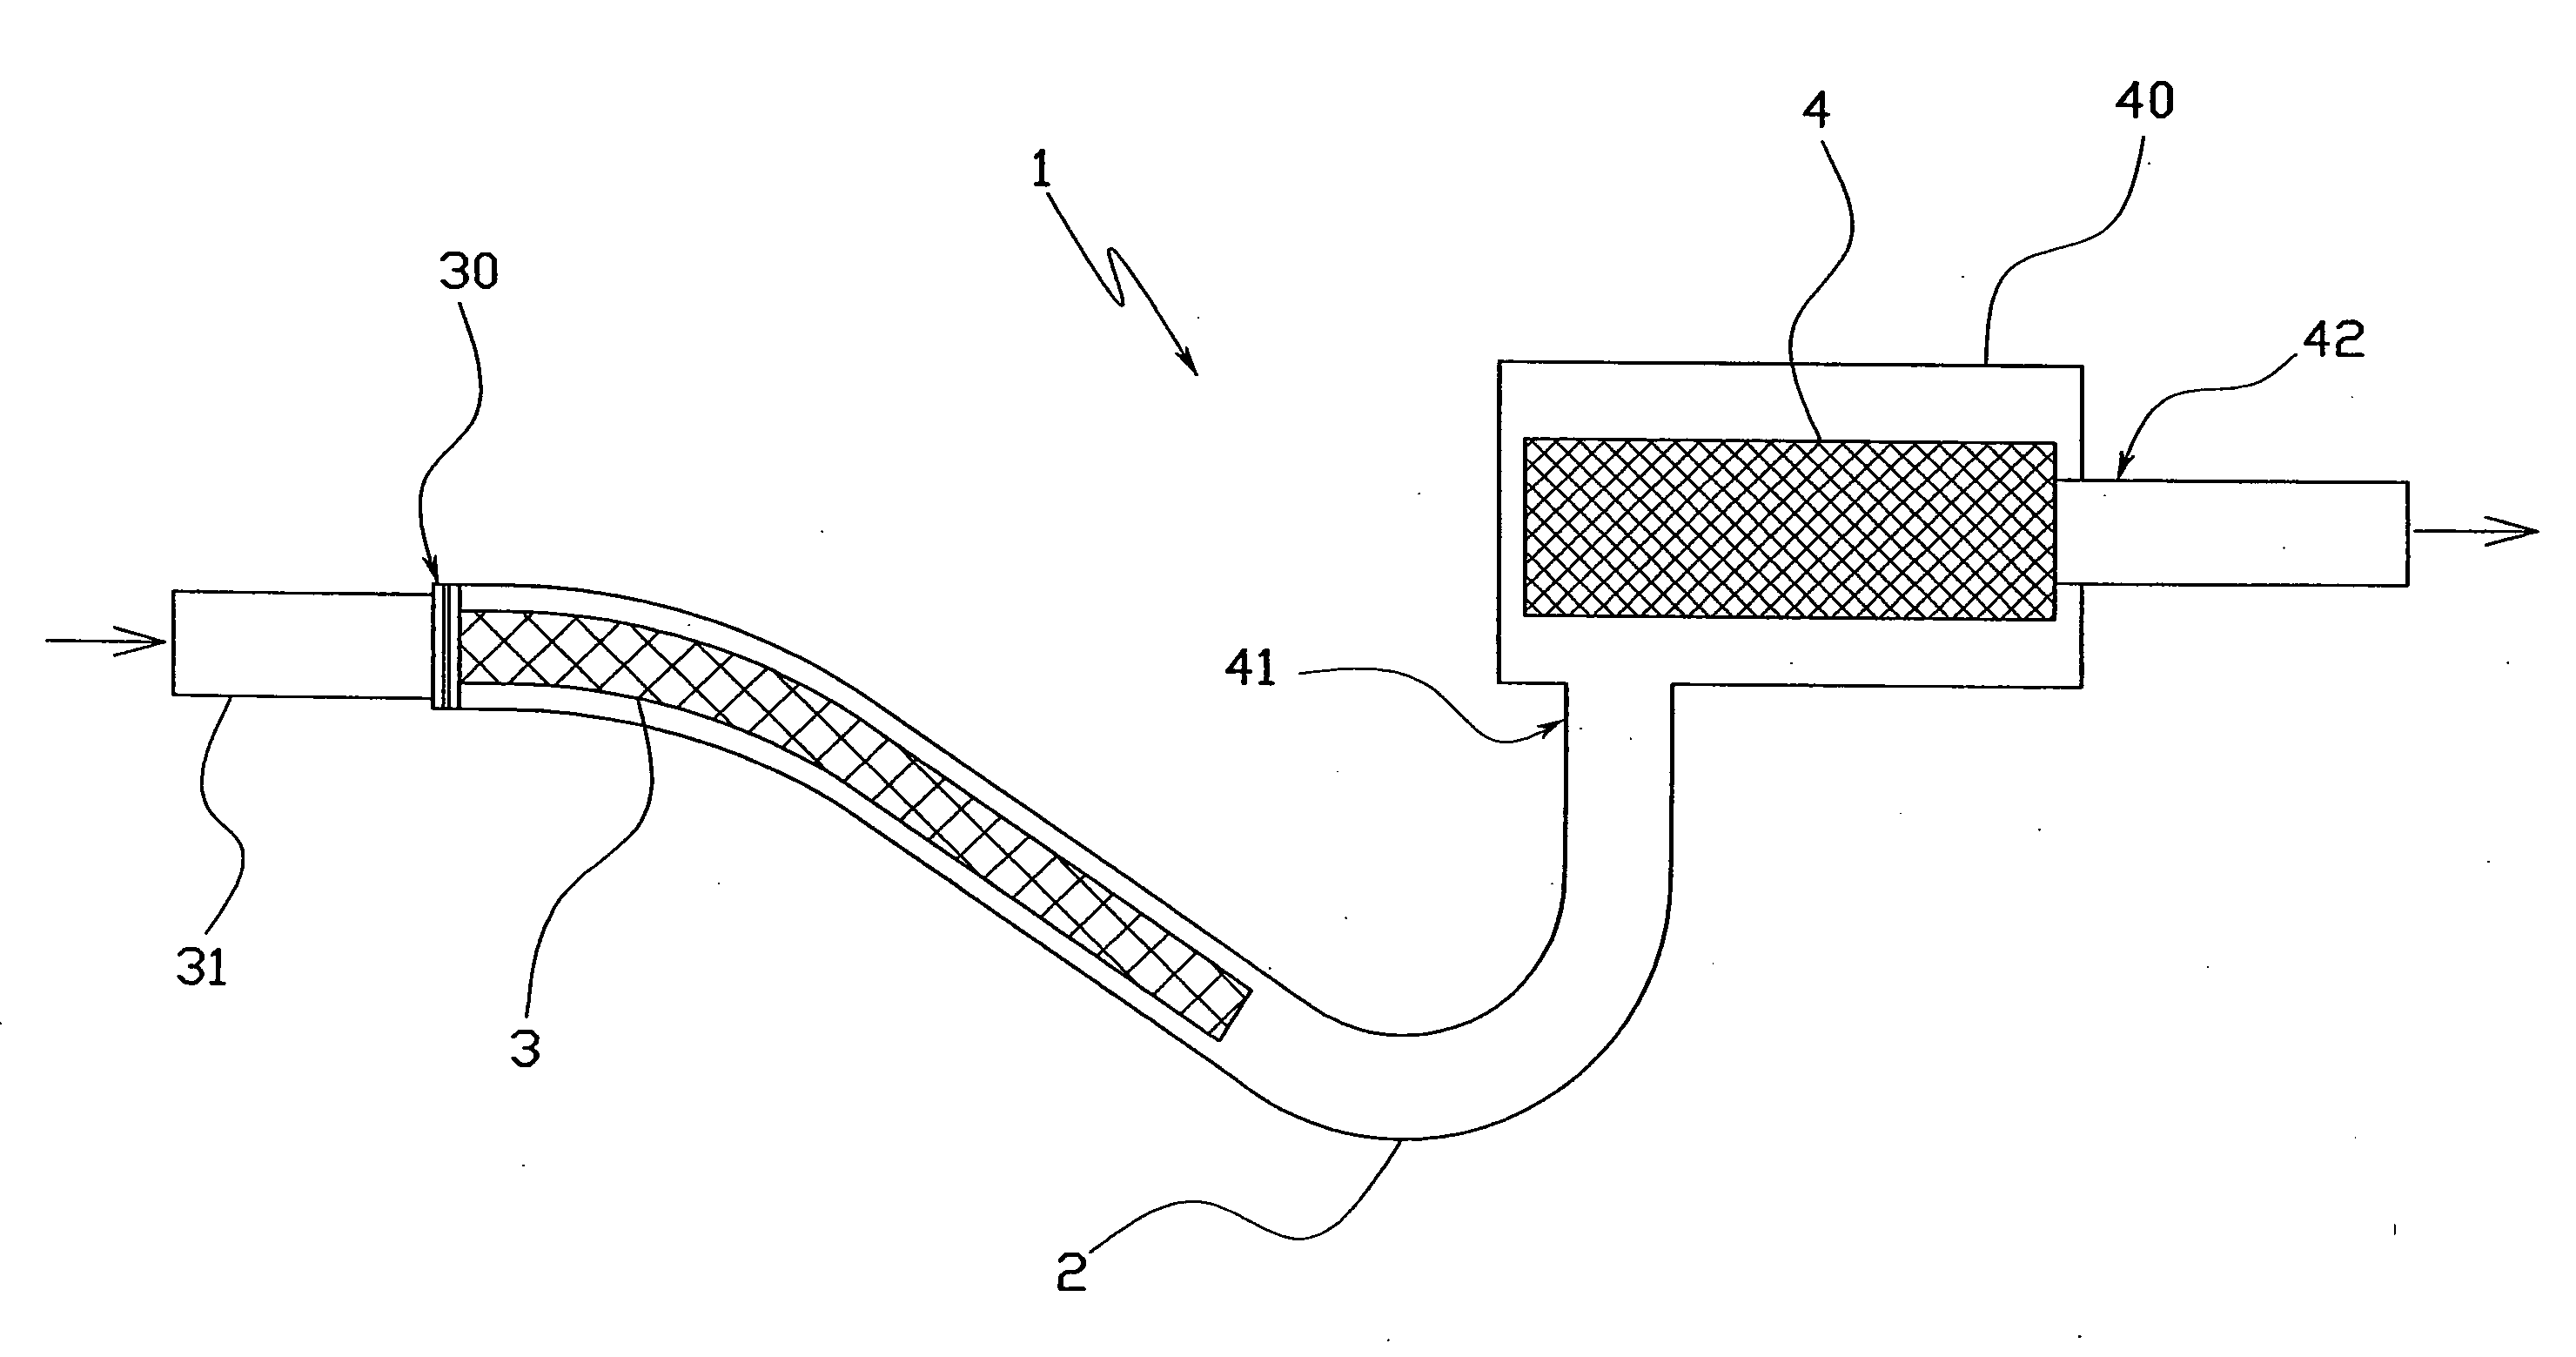 Filtering System for the Air Directed Towards an Internal Combustion Engine Intake